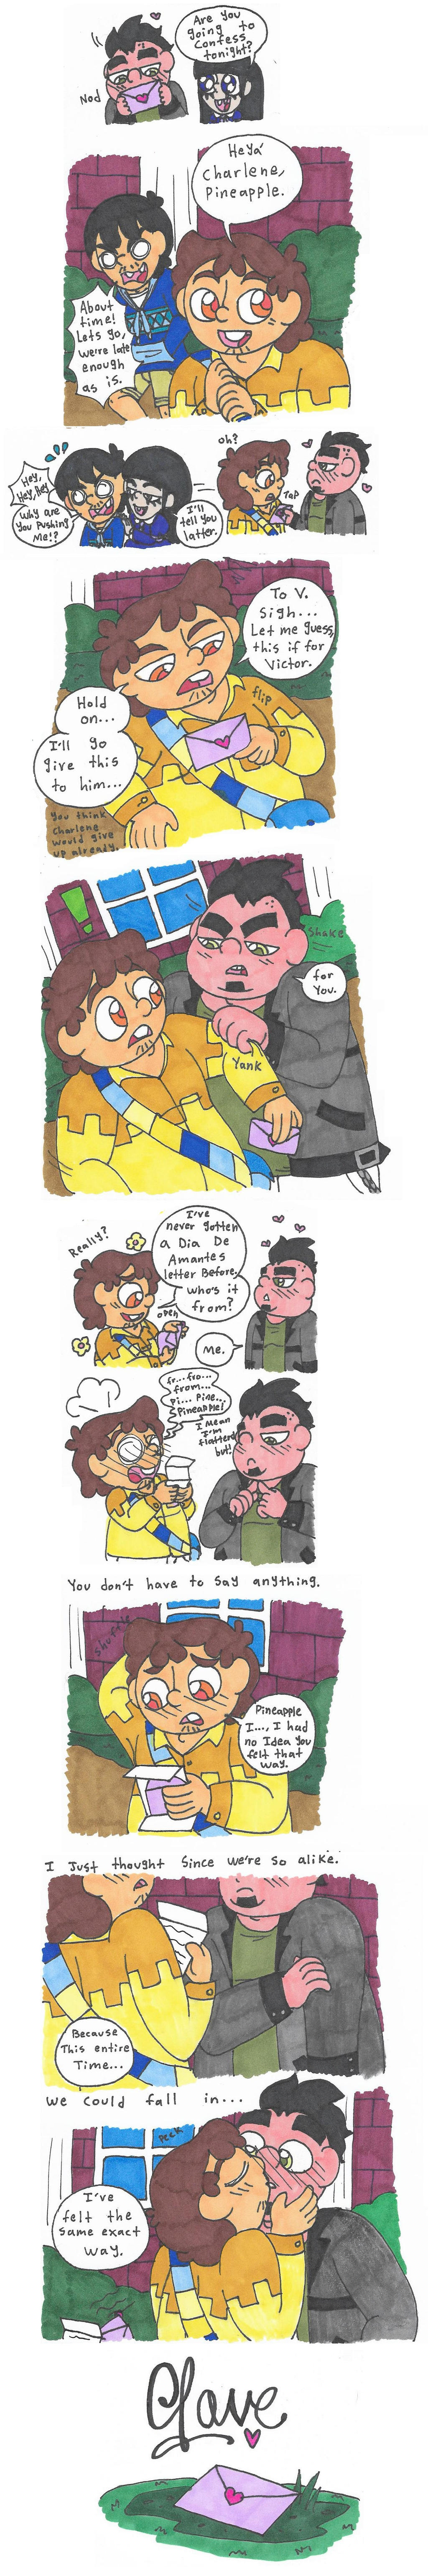 højen bus Kristendom Victor and Valentino - Pineapple's Confession by Abridgedfoamy on DeviantArt